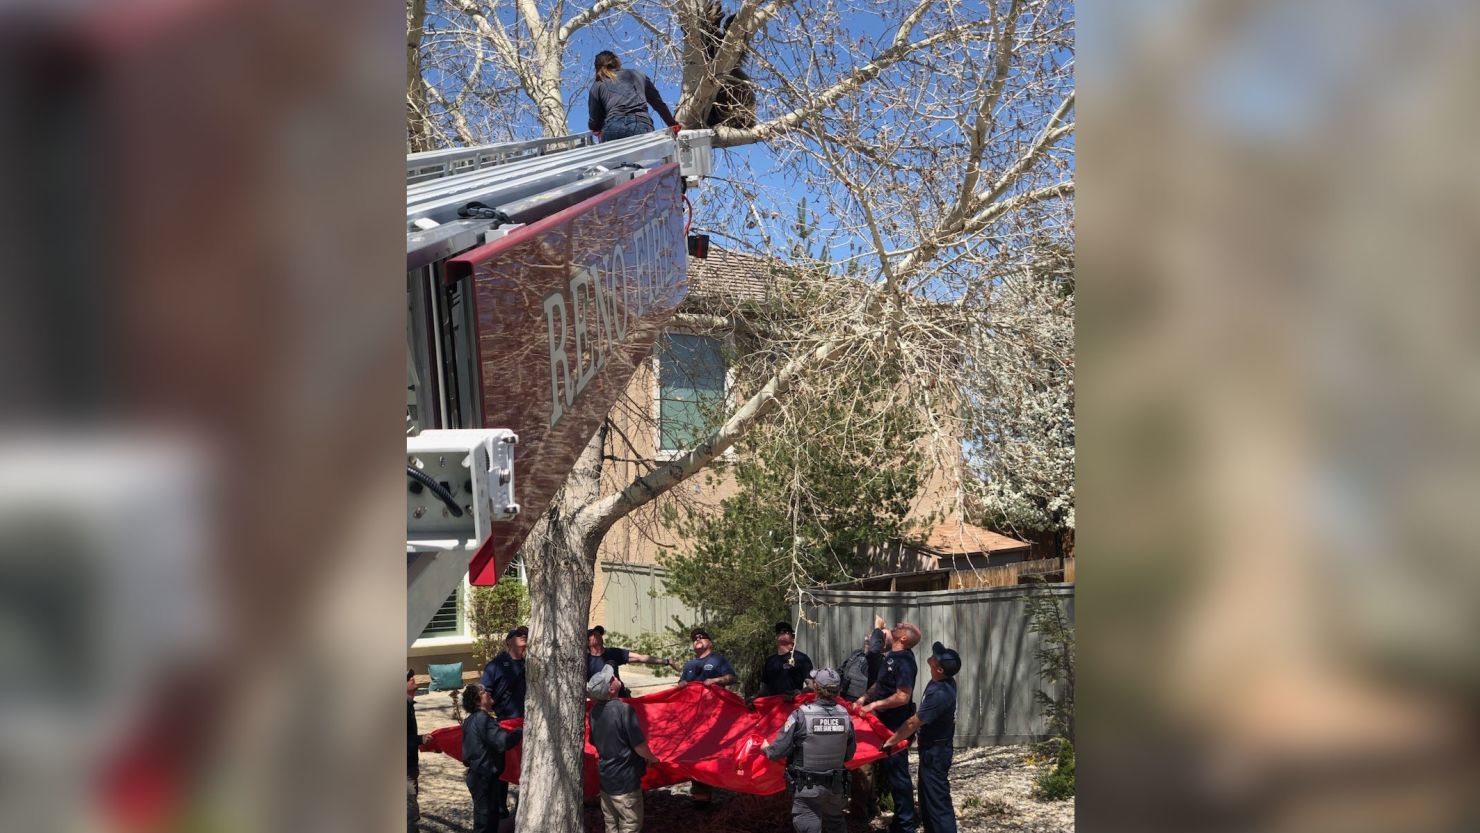 The Reno Fire Department assisted with getting the bear out of the tree, according to a Facebook post from the department.